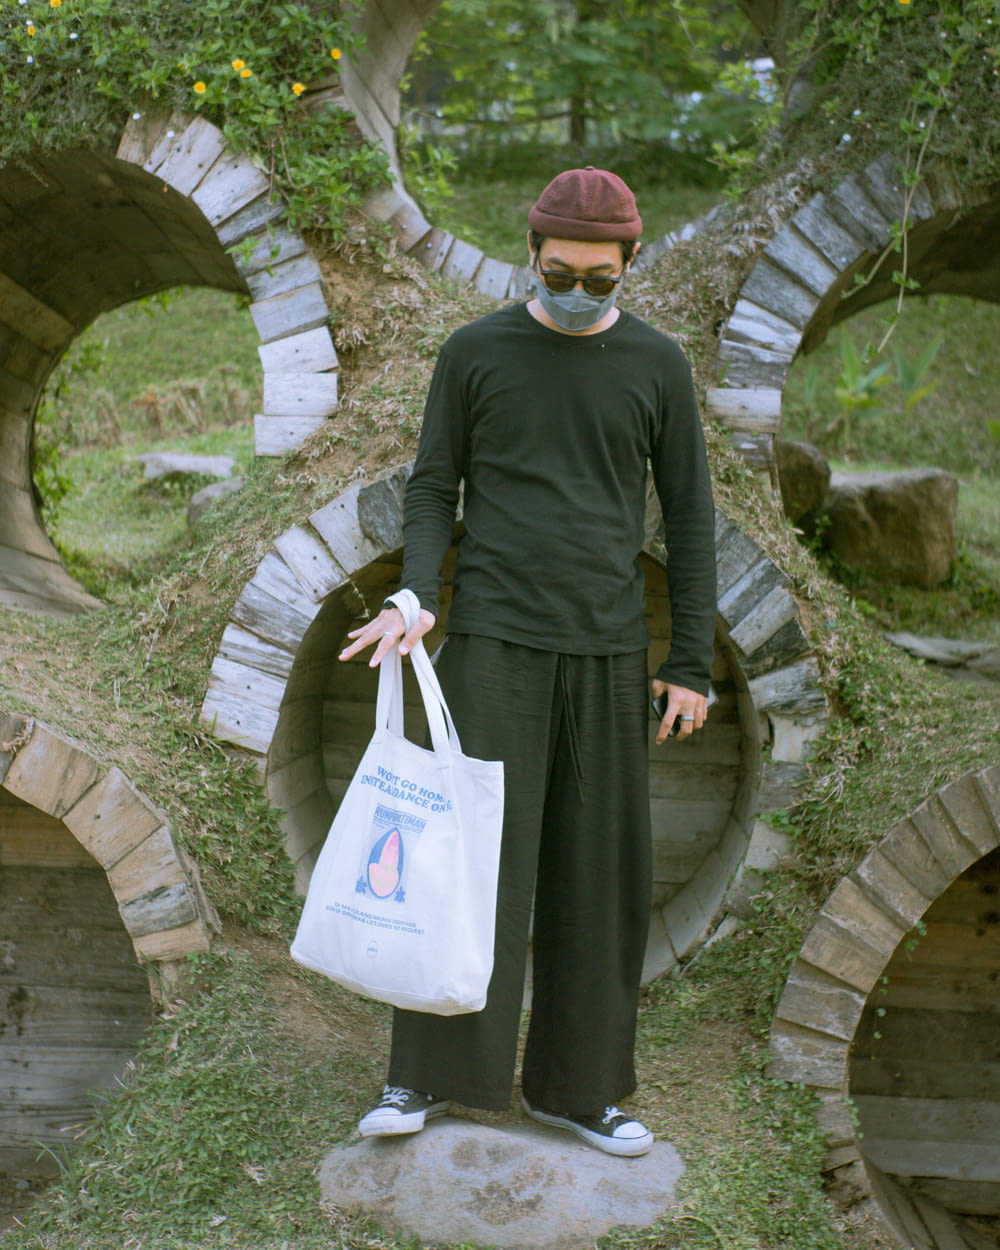 a person wearing a mask and holding a bag